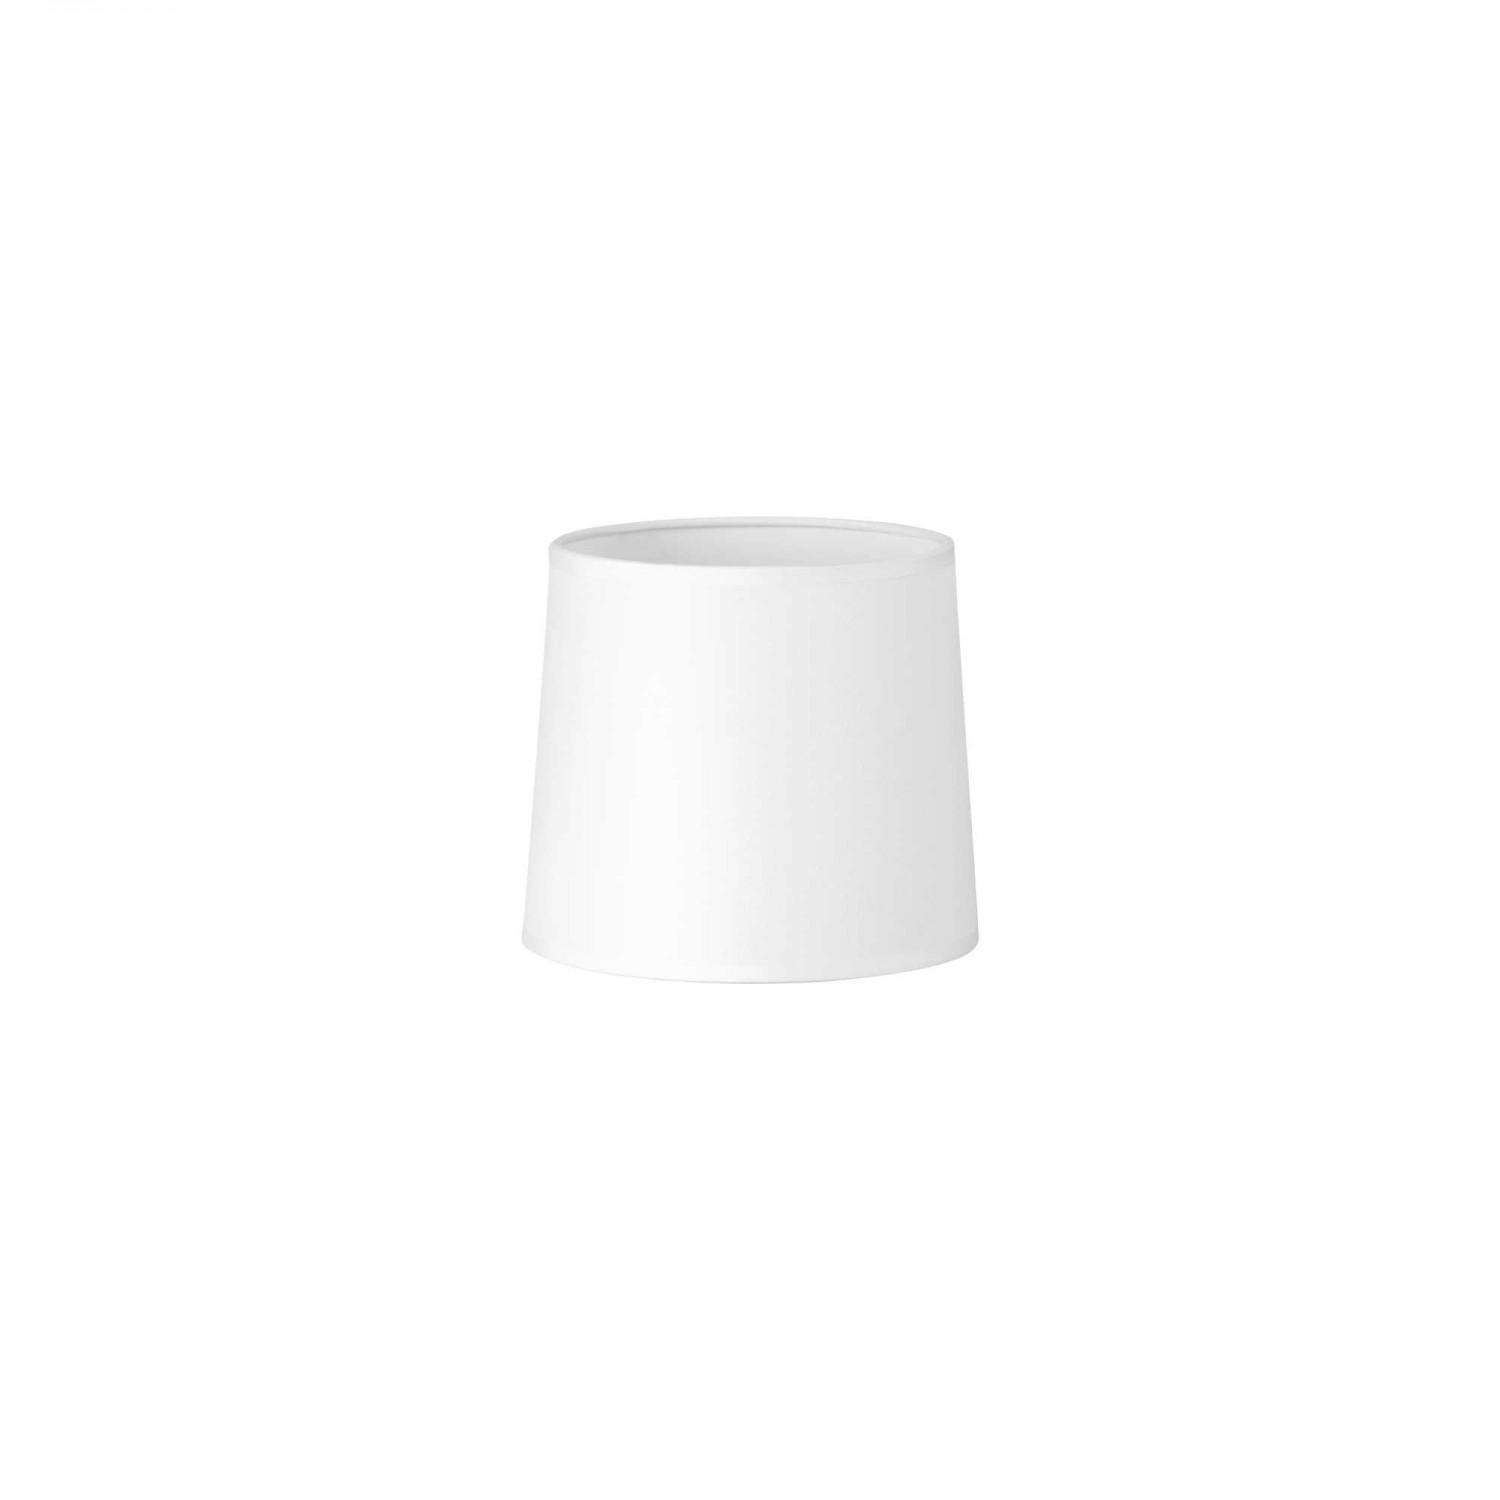 alt_image Абажур Ideal Lux SET UP PARALUME CONO D16 BIANCO 260341